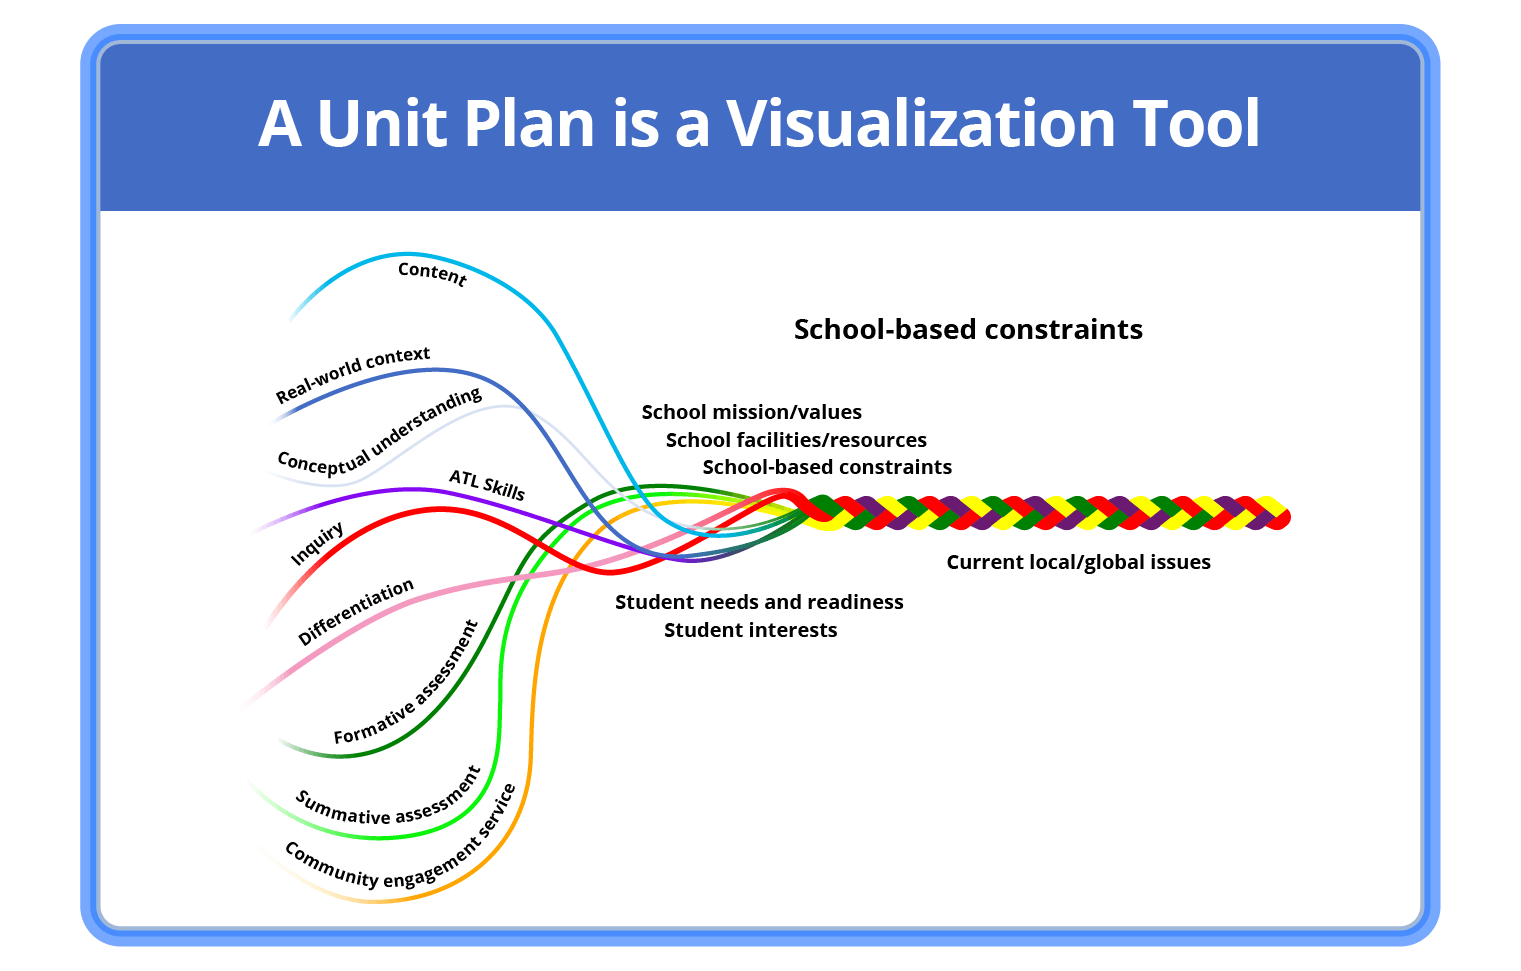 02. A unit plan is a visualization tool@2x 1